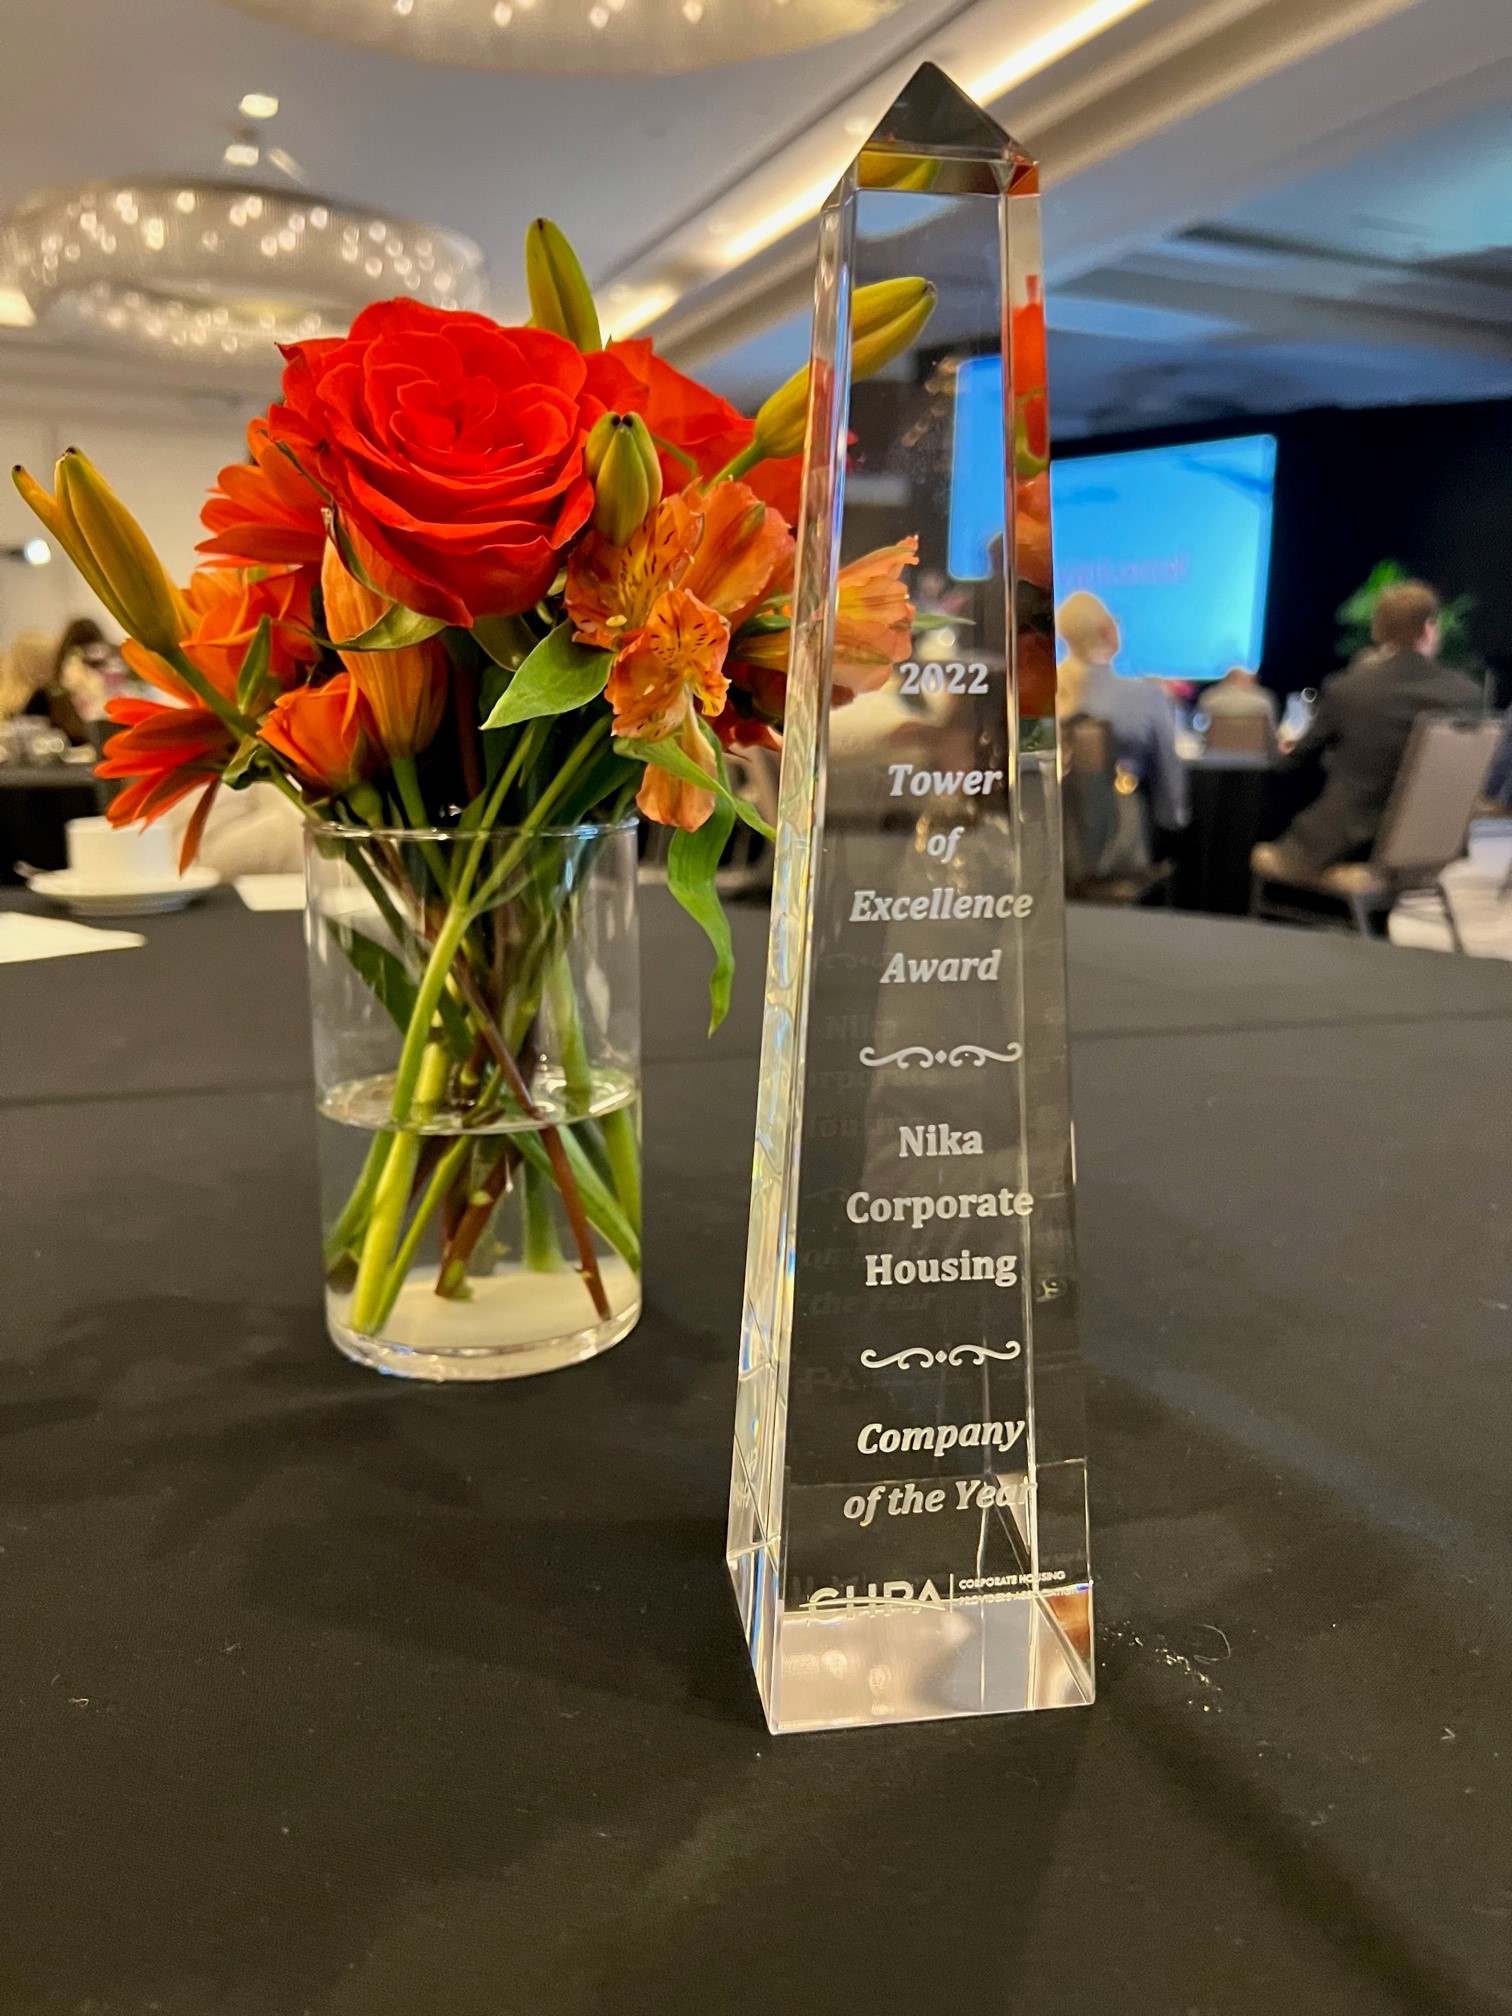 Nika Corporate Housing Selected as 2022 Company of the Year CHPA Tower of Excellence Award